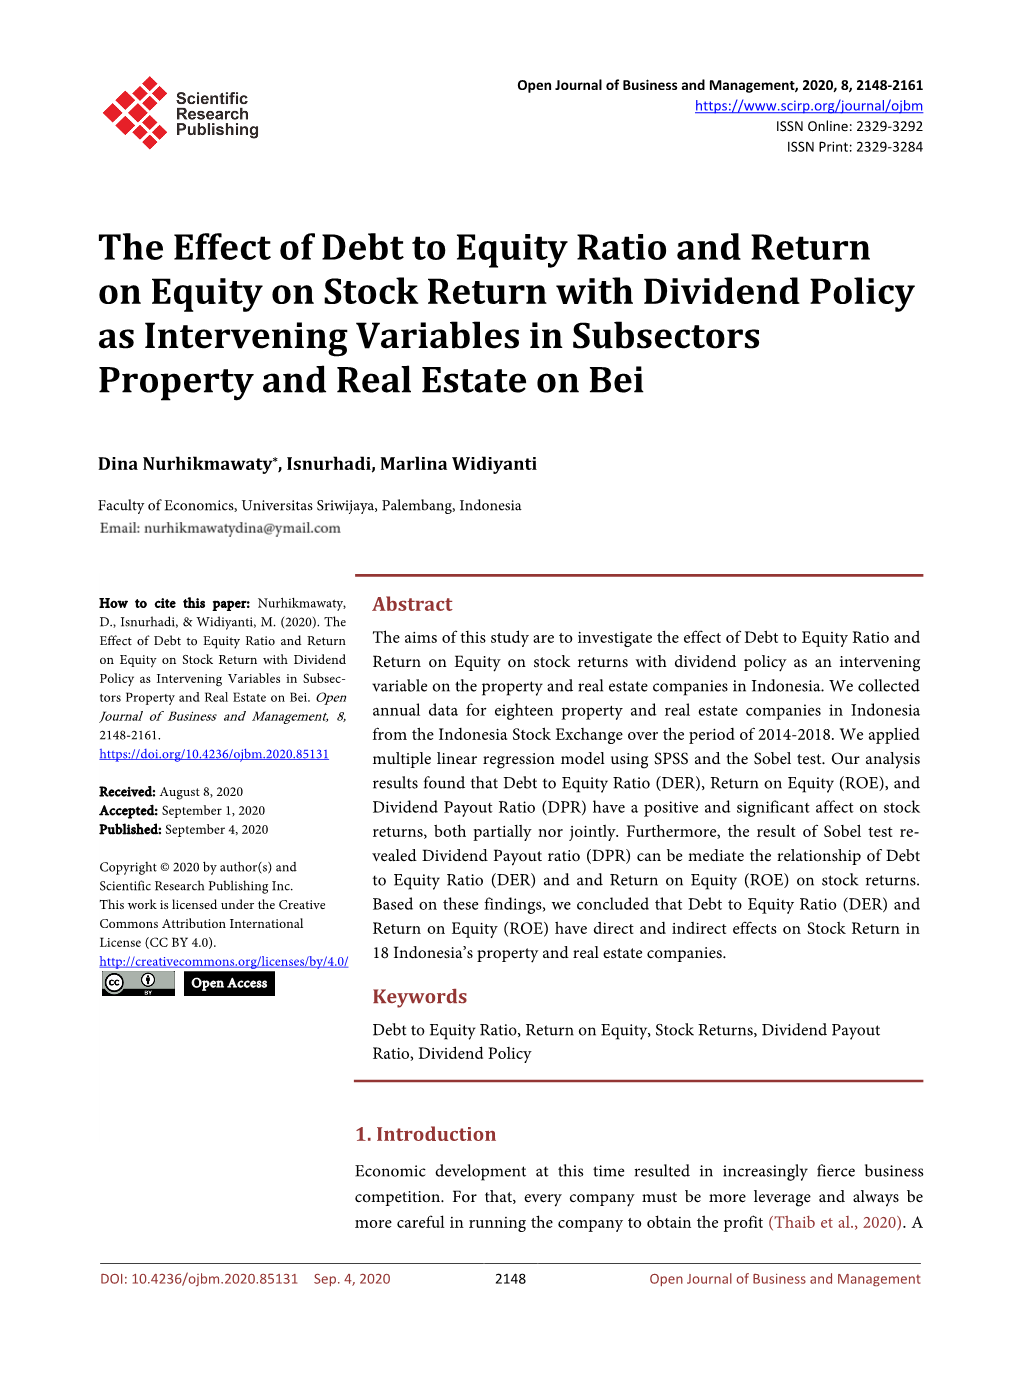 The Effect of Debt to Equity Ratio and Return on Equity on Stock Return with Dividend Policy As Intervening Variables in Subsectors Property and Real Estate on Bei